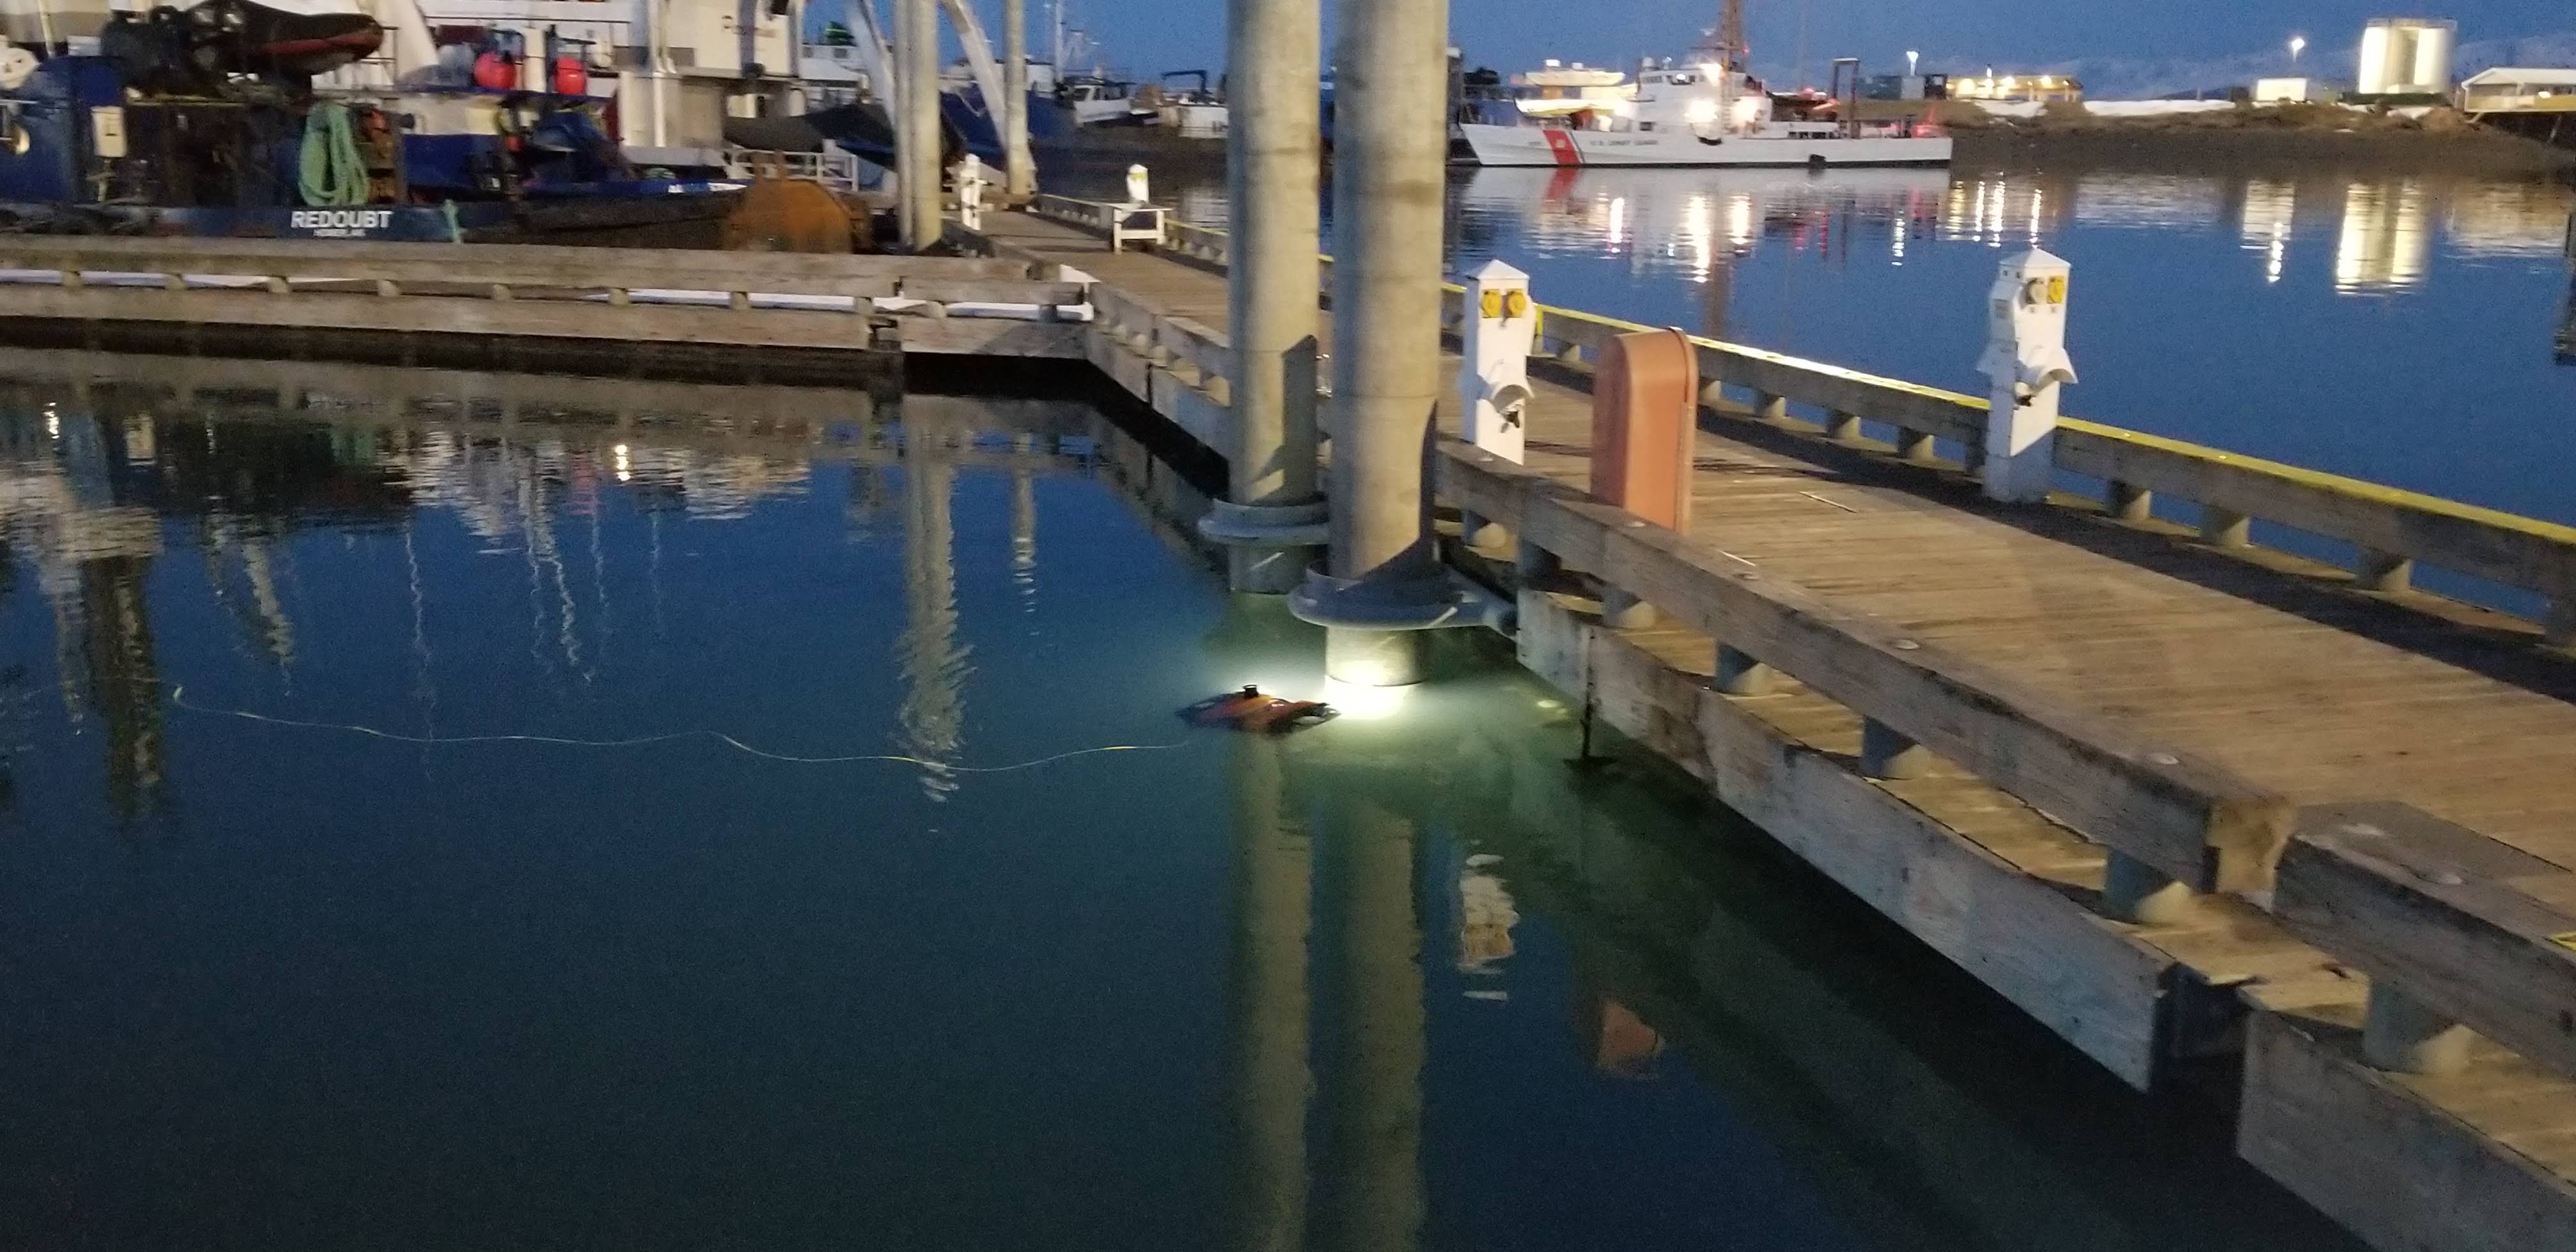 Vision Subsea using an ROV at a port